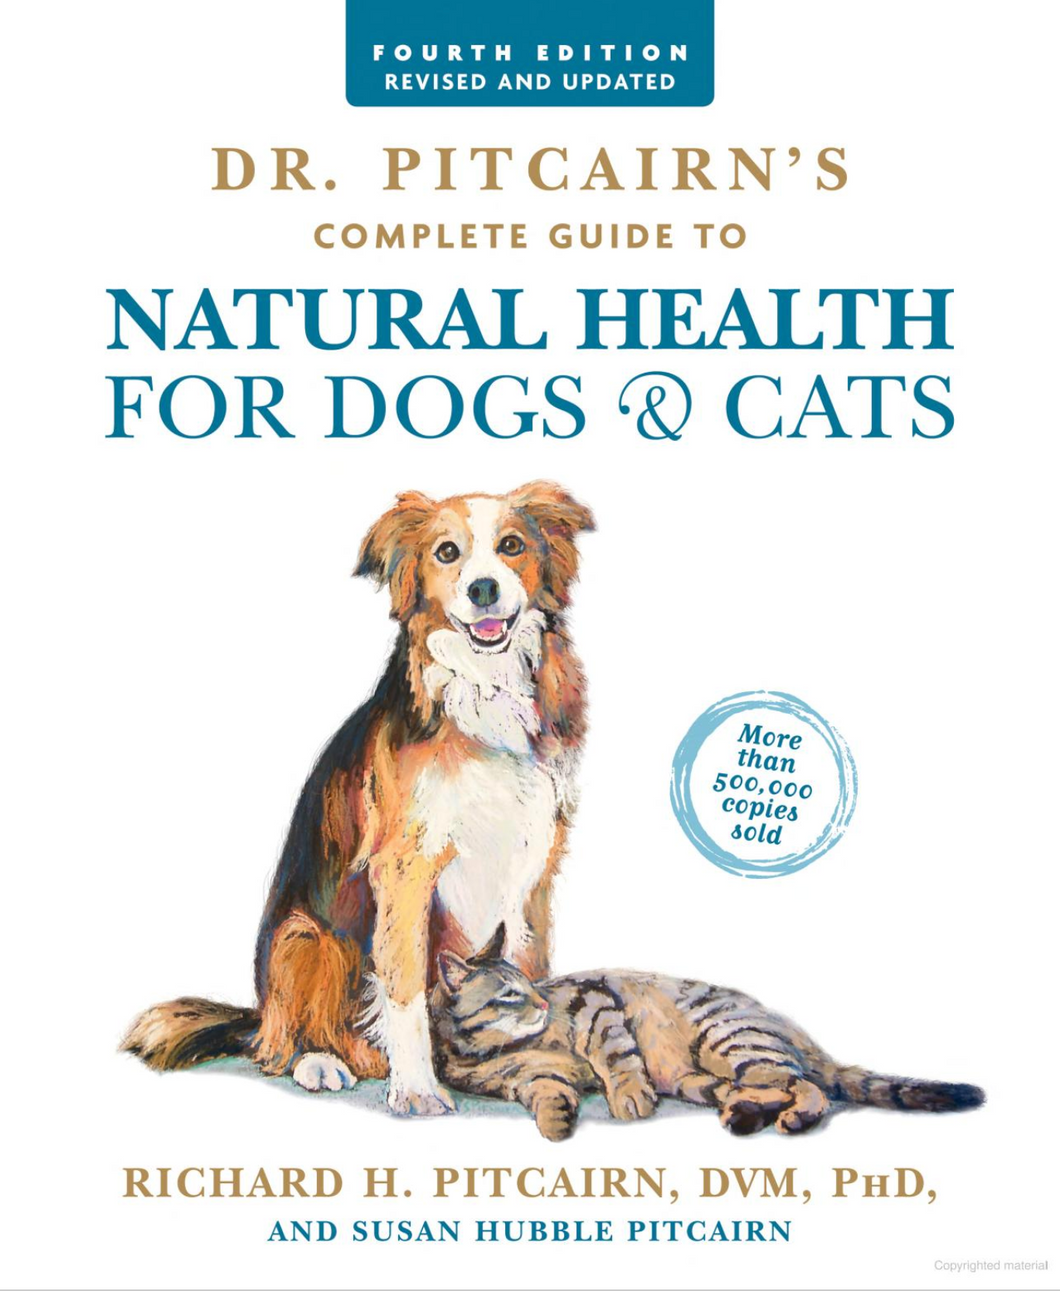 Dr Pitcairn's Complete Guide to Natural Health for Dogs and Cats Book